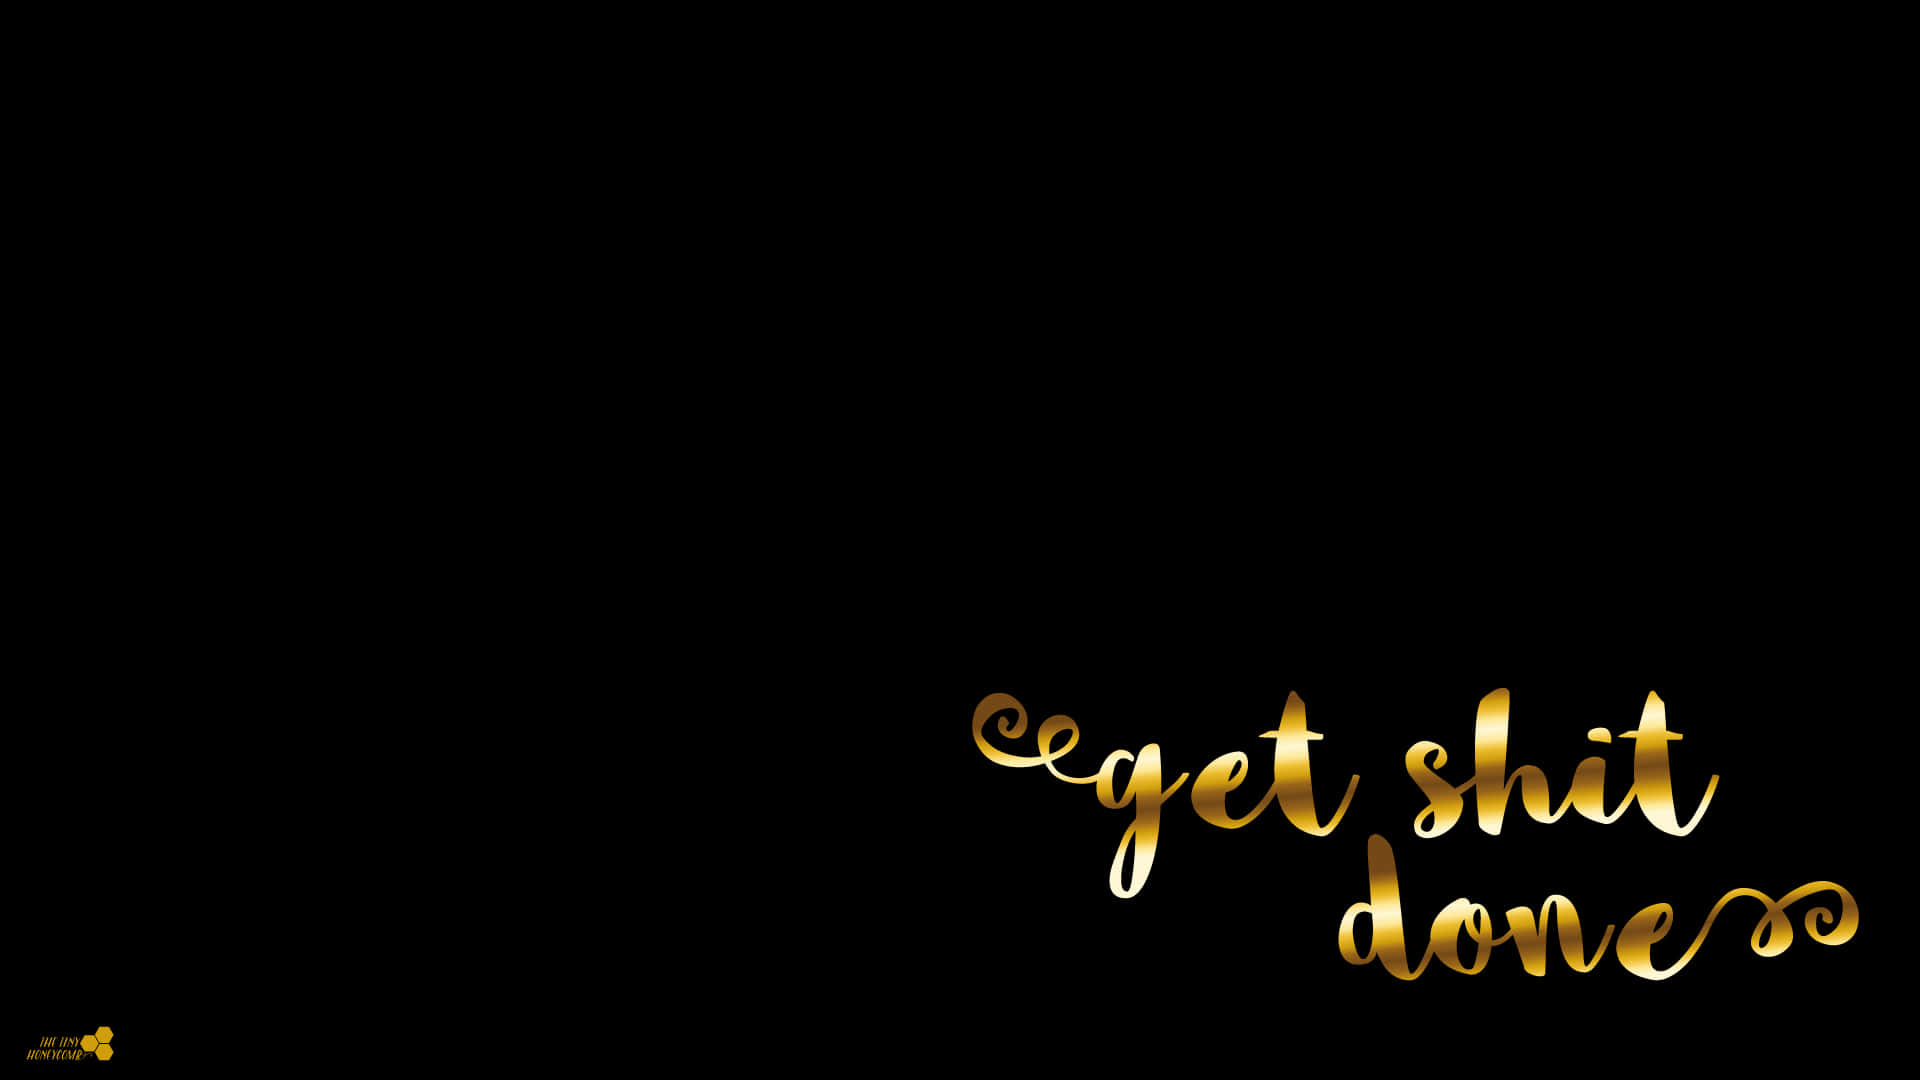 Get Shit Done - Gold Lettering On A Black Background Wallpaper